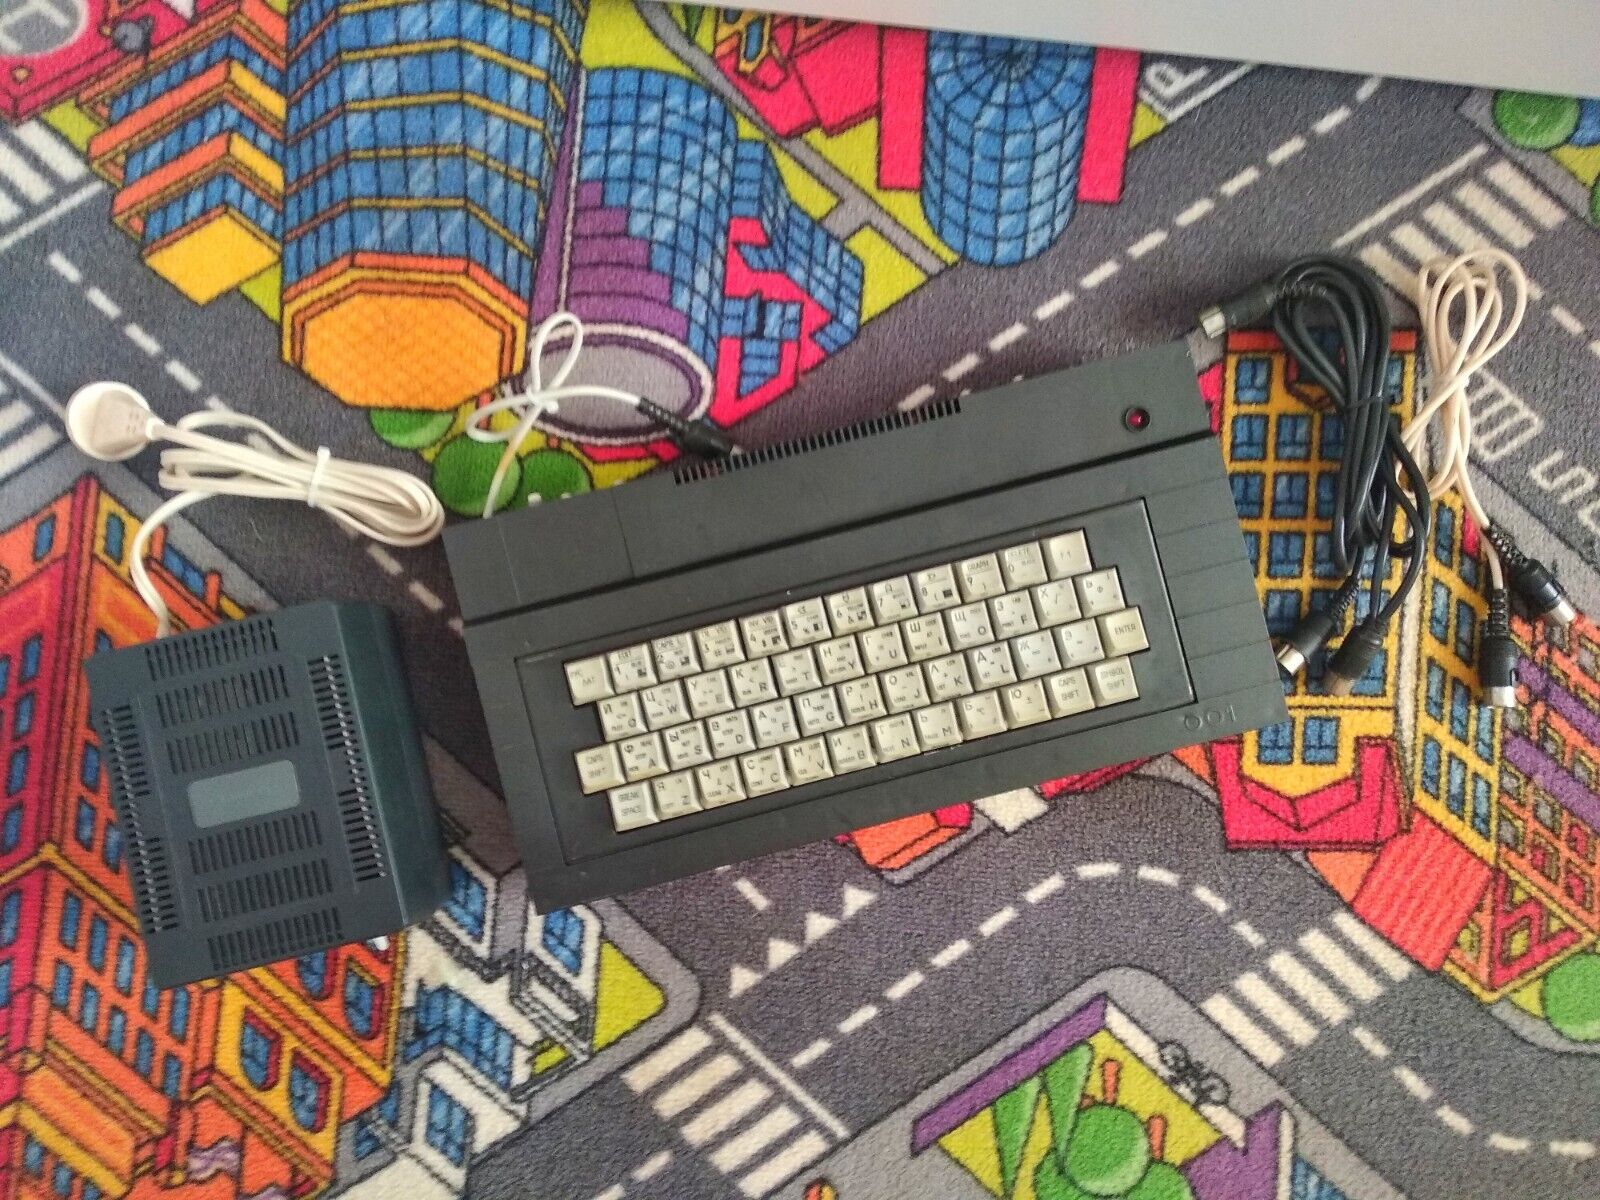 home vintage gaming computer spectrum made in ussr